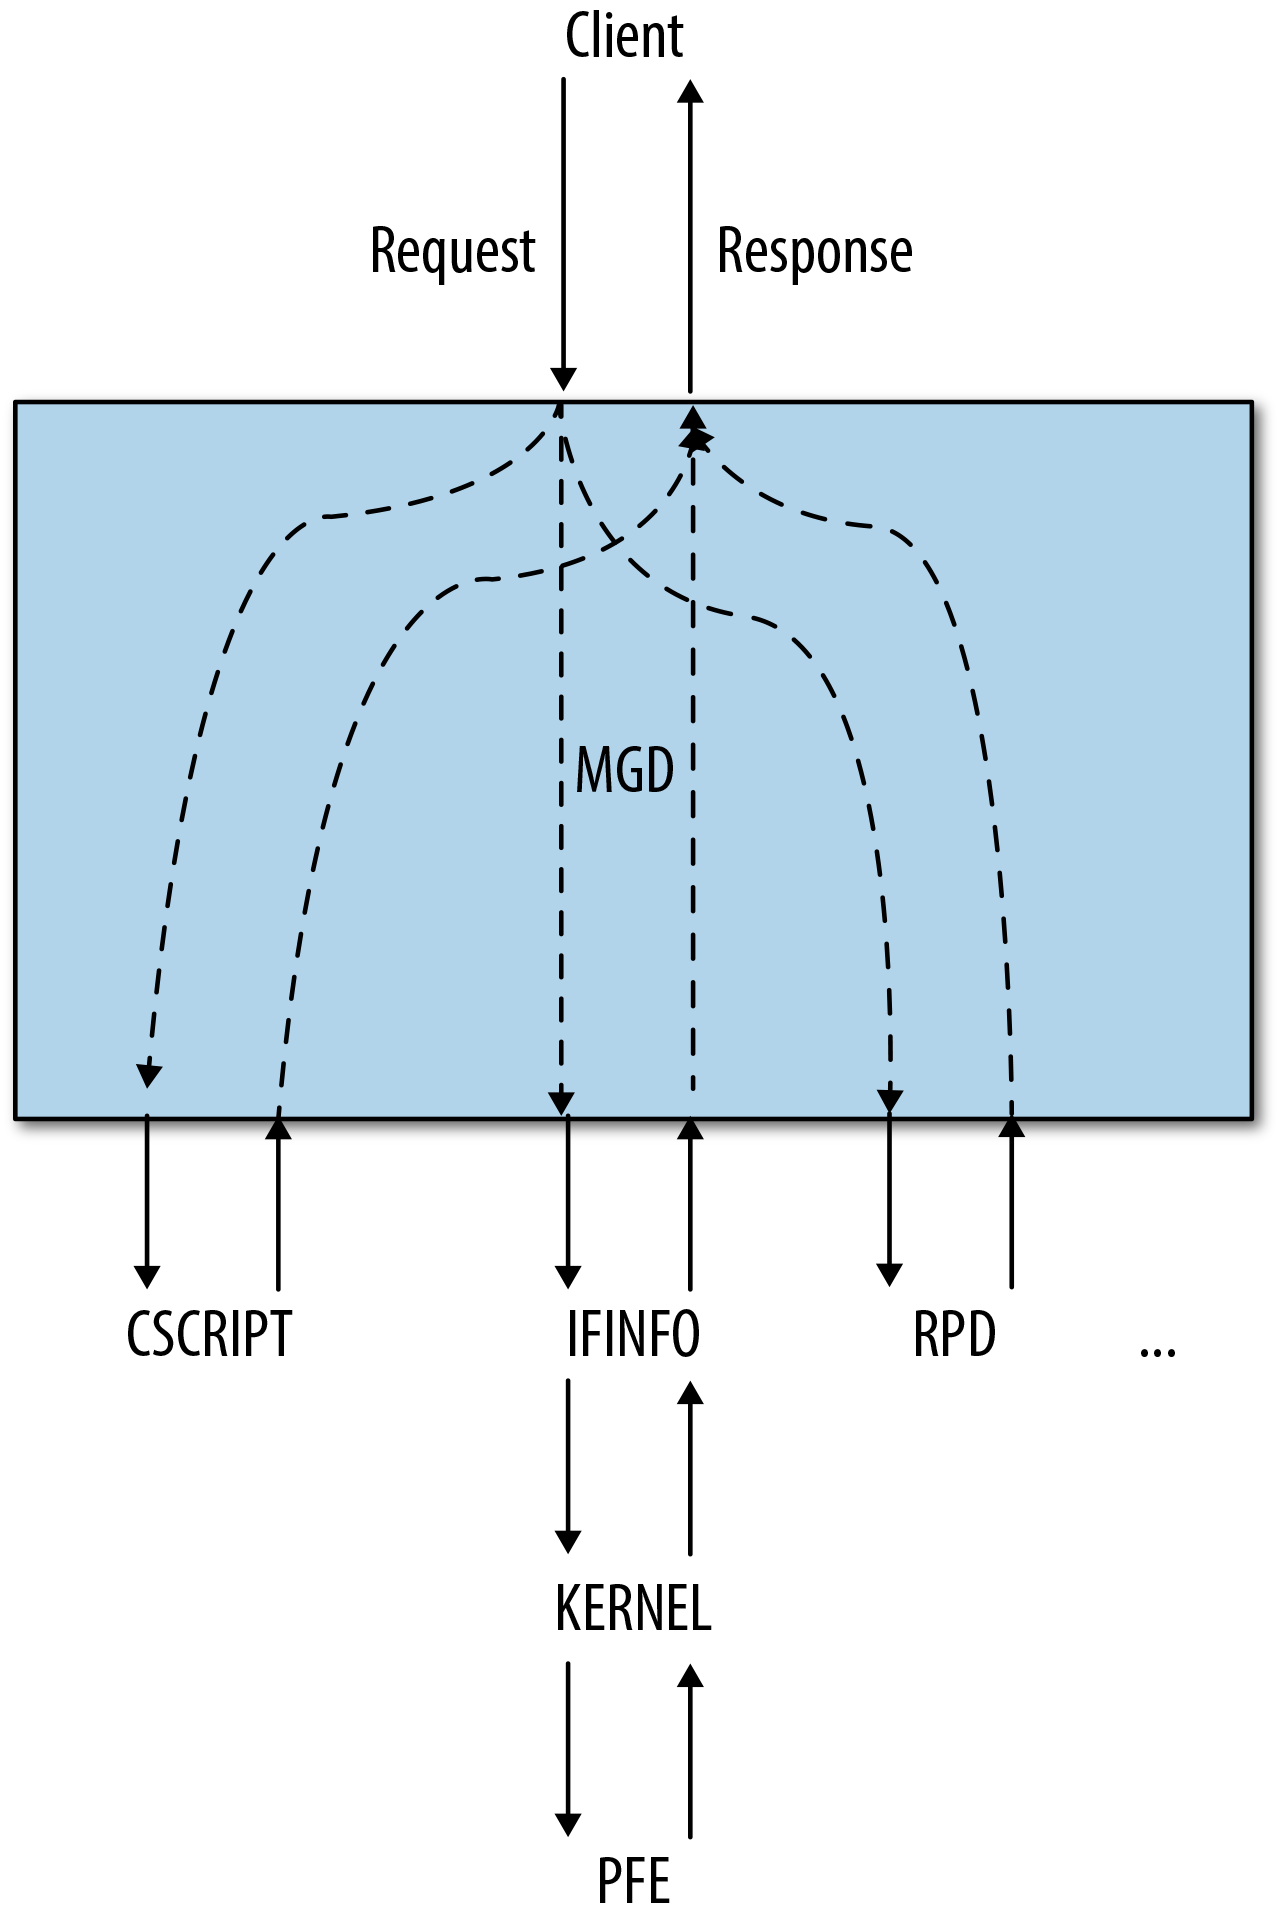 This figure illustrates the way that MGD handles requests
            satisfied by a daemon or external process. MGD passes the request
            to the daemon or external process. When the daemon or process
            responds, MGD passes the response to the client.